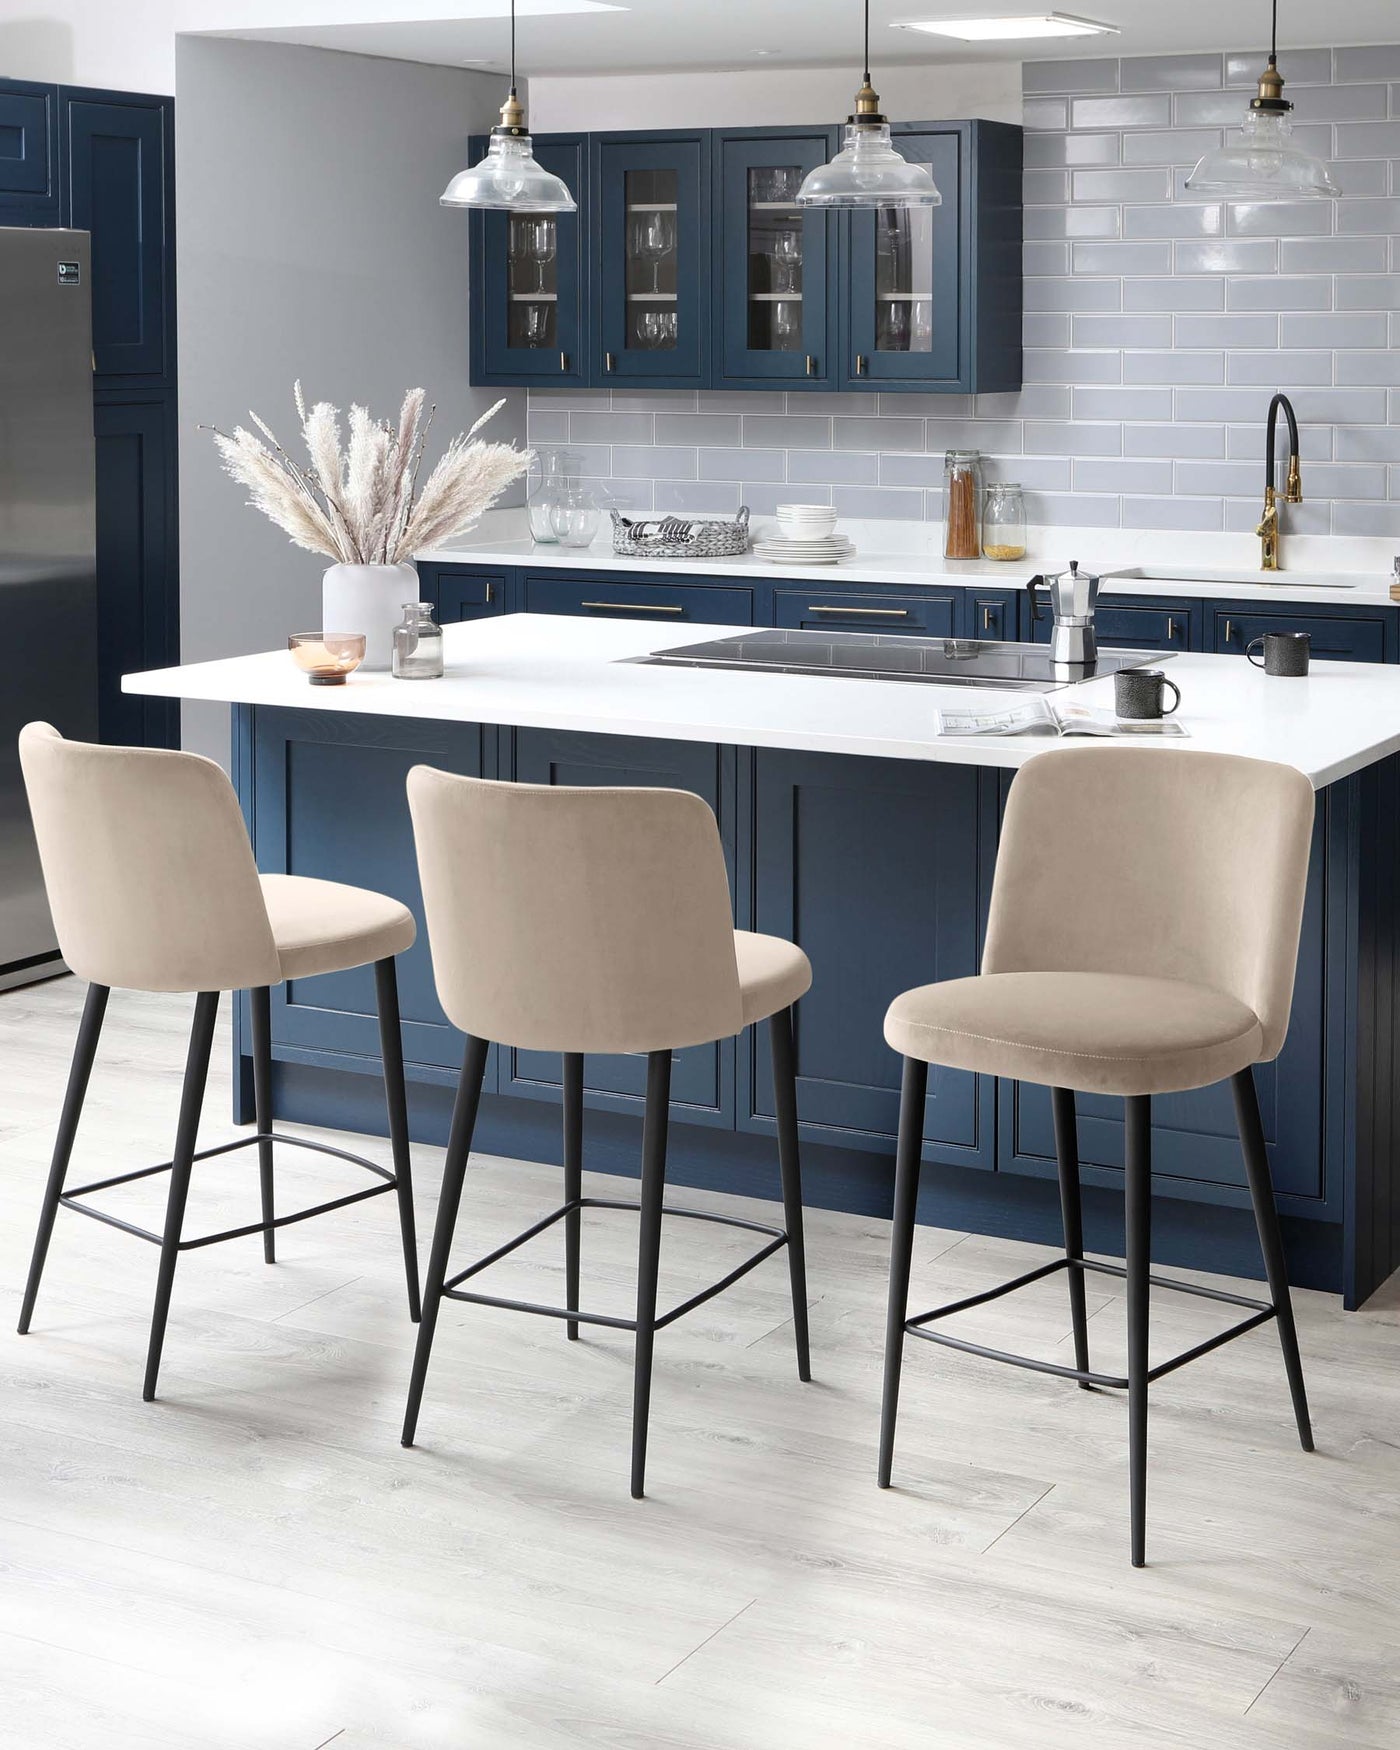 Three modern kitchen bar stools with beige upholstery and black metal legs, featuring a minimalist design and a simple footrest.